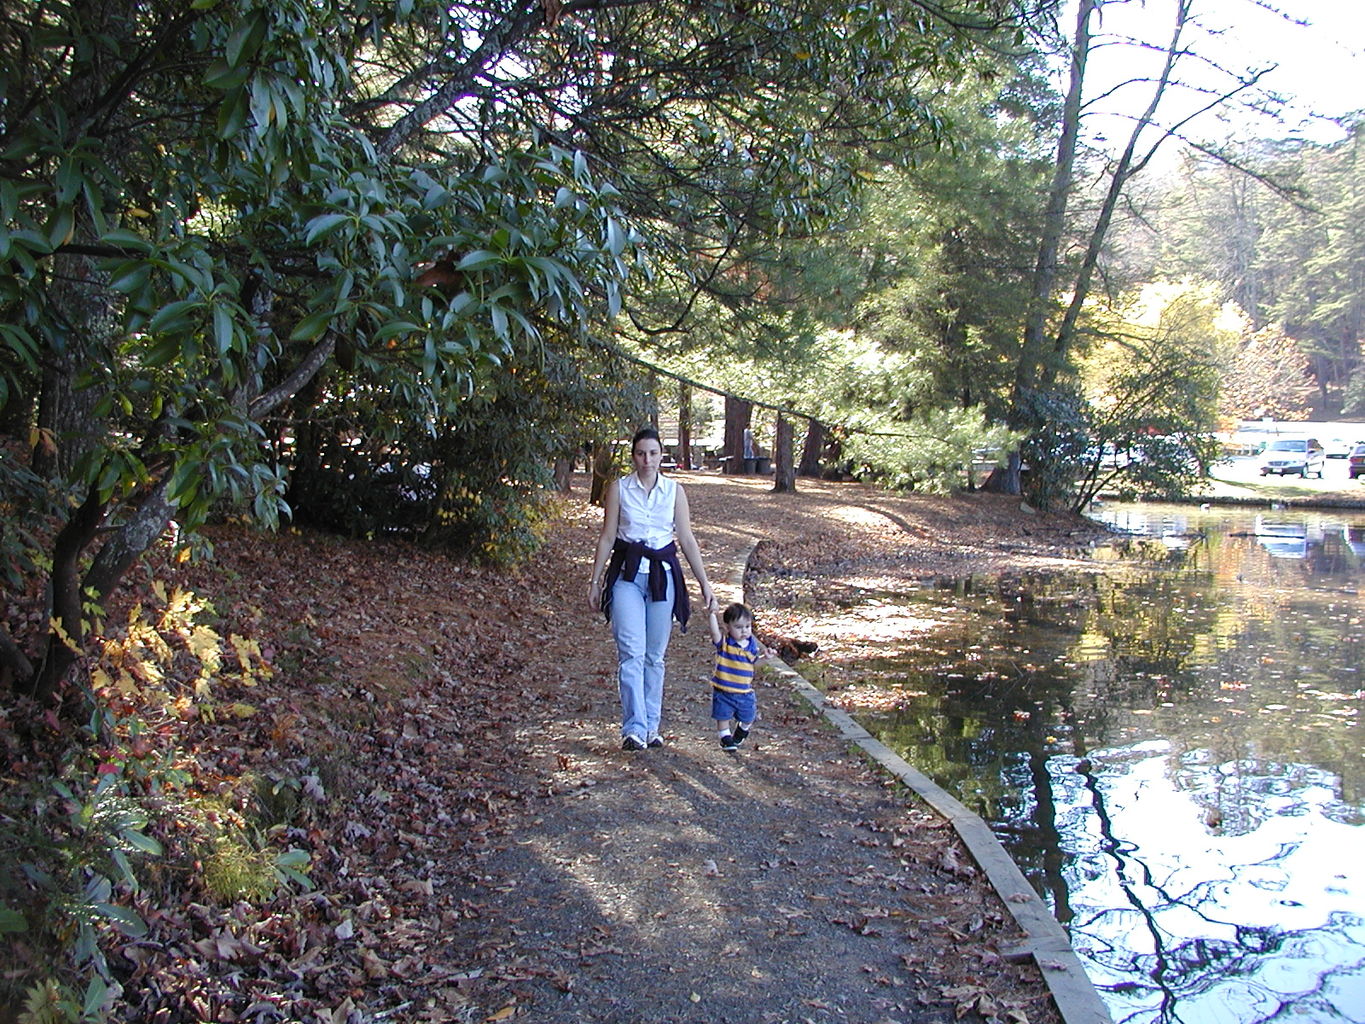 Visit to a Park in N GA Mountains
